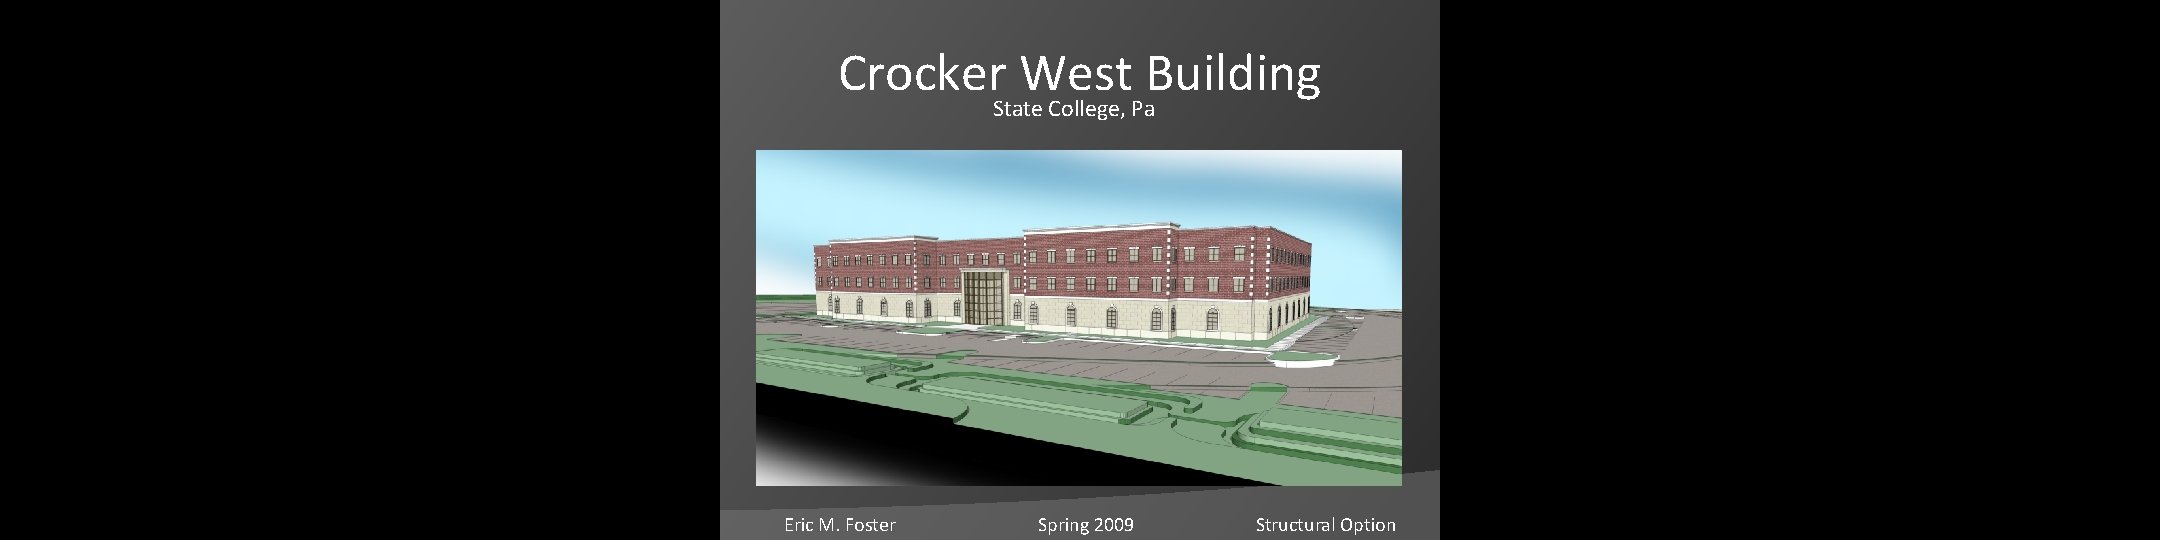 Crocker. State. West Building College, Pa Eric M. Foster Spring 2009 Structural Option 